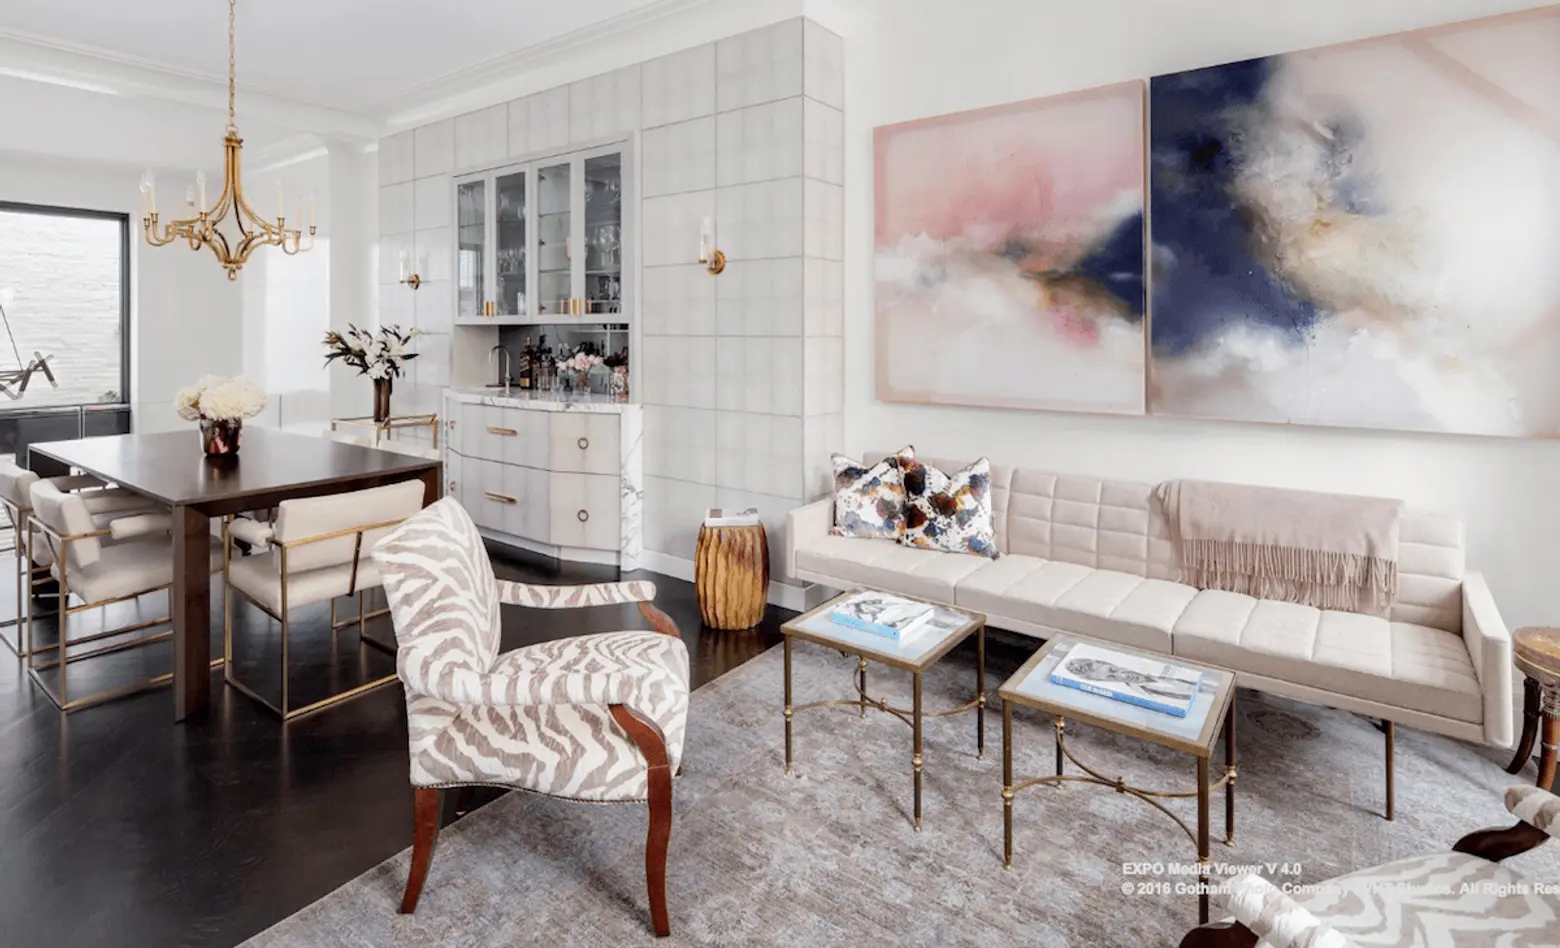 66 Charles Street, Cool Listings, townhouse, west village, west village townhouse for sale, David Hottenroth, interiors